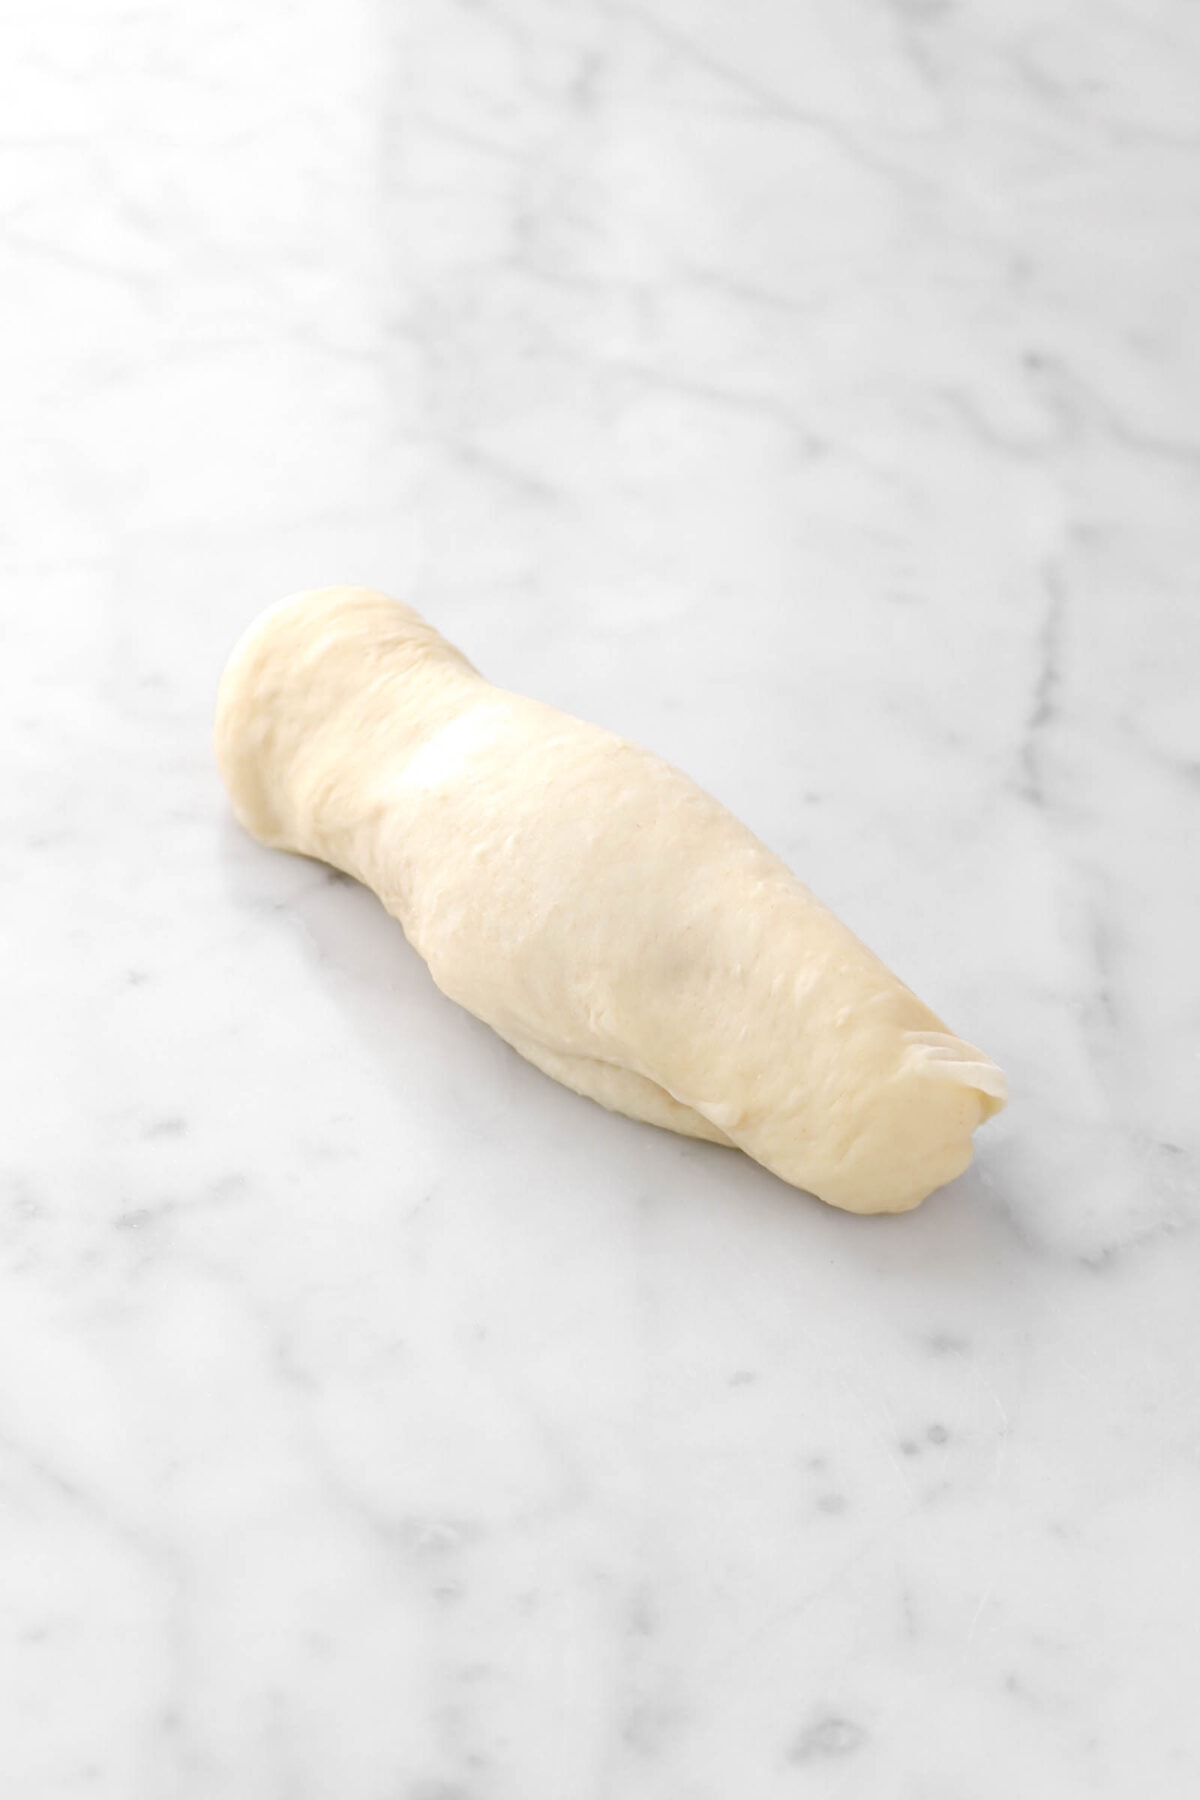 dough rolled into a small log